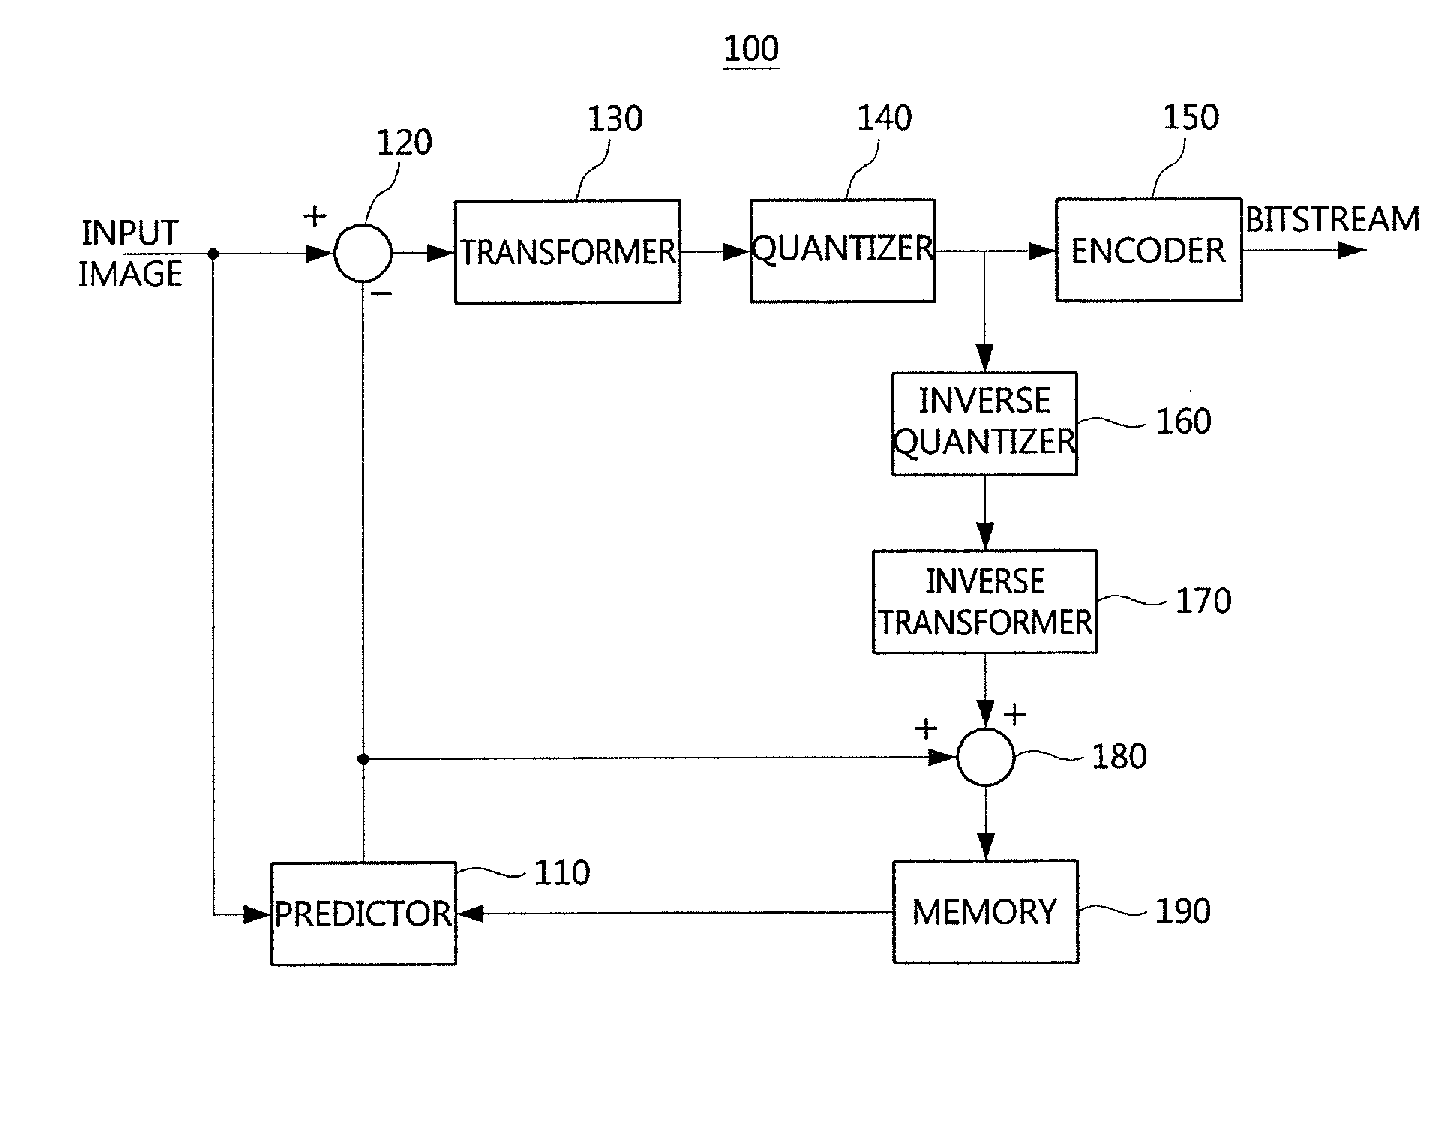 Image encoding and decoding apparatus, and image encoding and decoding method